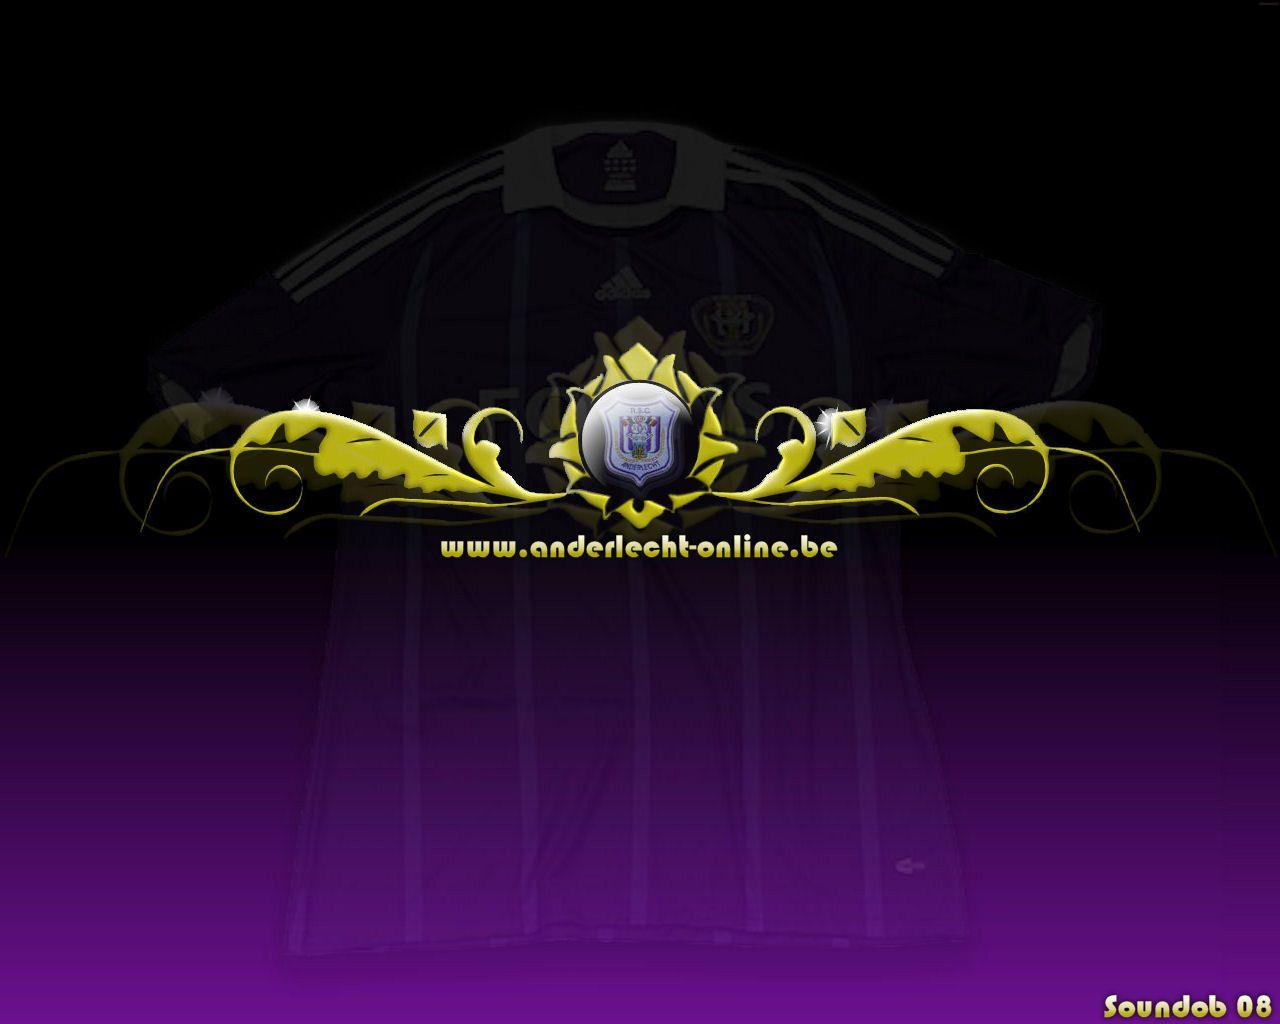 Anderlecht Online, banners, skins and more